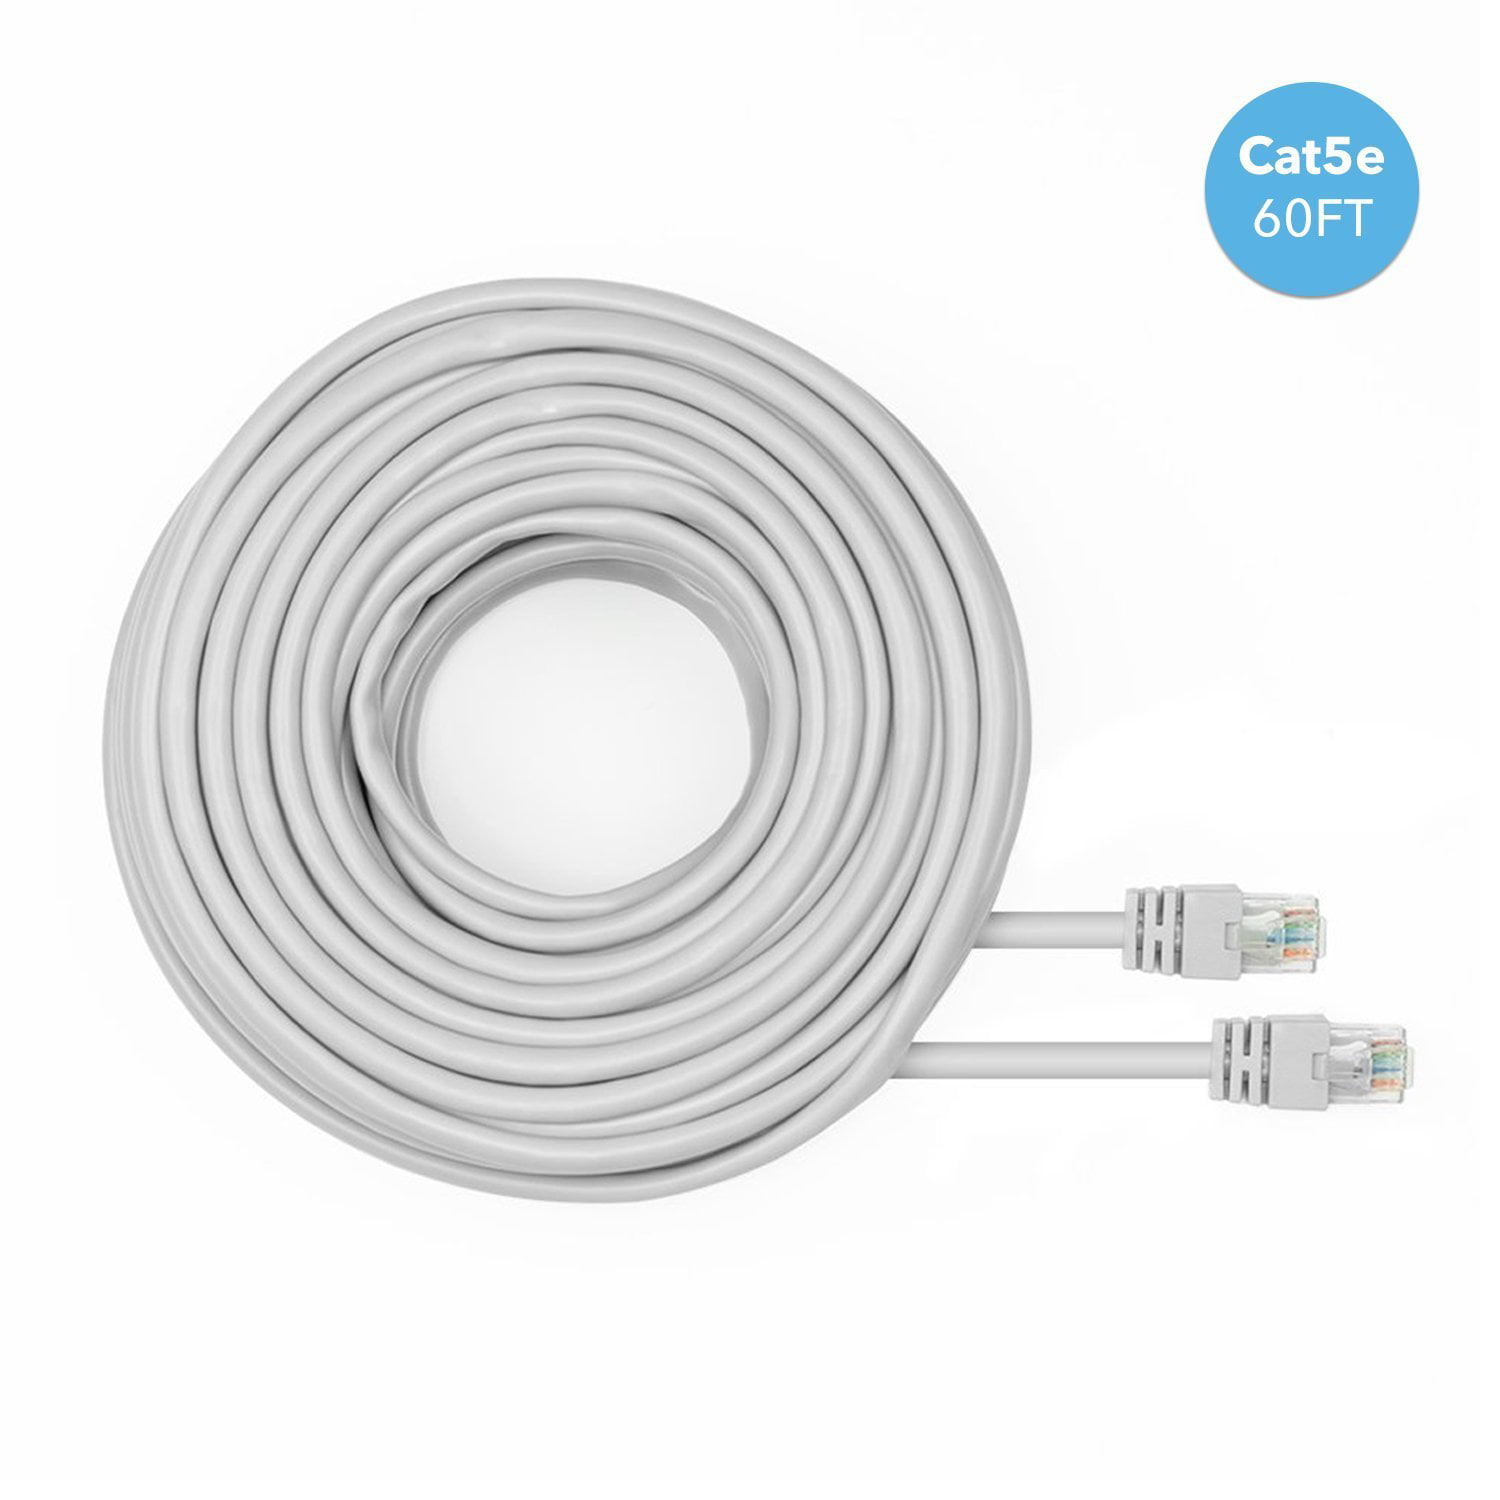 15 Feet （Bundled with The Cable Clips） YUBAO Outdoor RJ45 Ethernet STP Cat5e Network Cable Internet LAN Patch Lead Wholesale 5ft 10ft 15ft 30ft 50ft 65ft 80ft 100ft 160ft 330ft